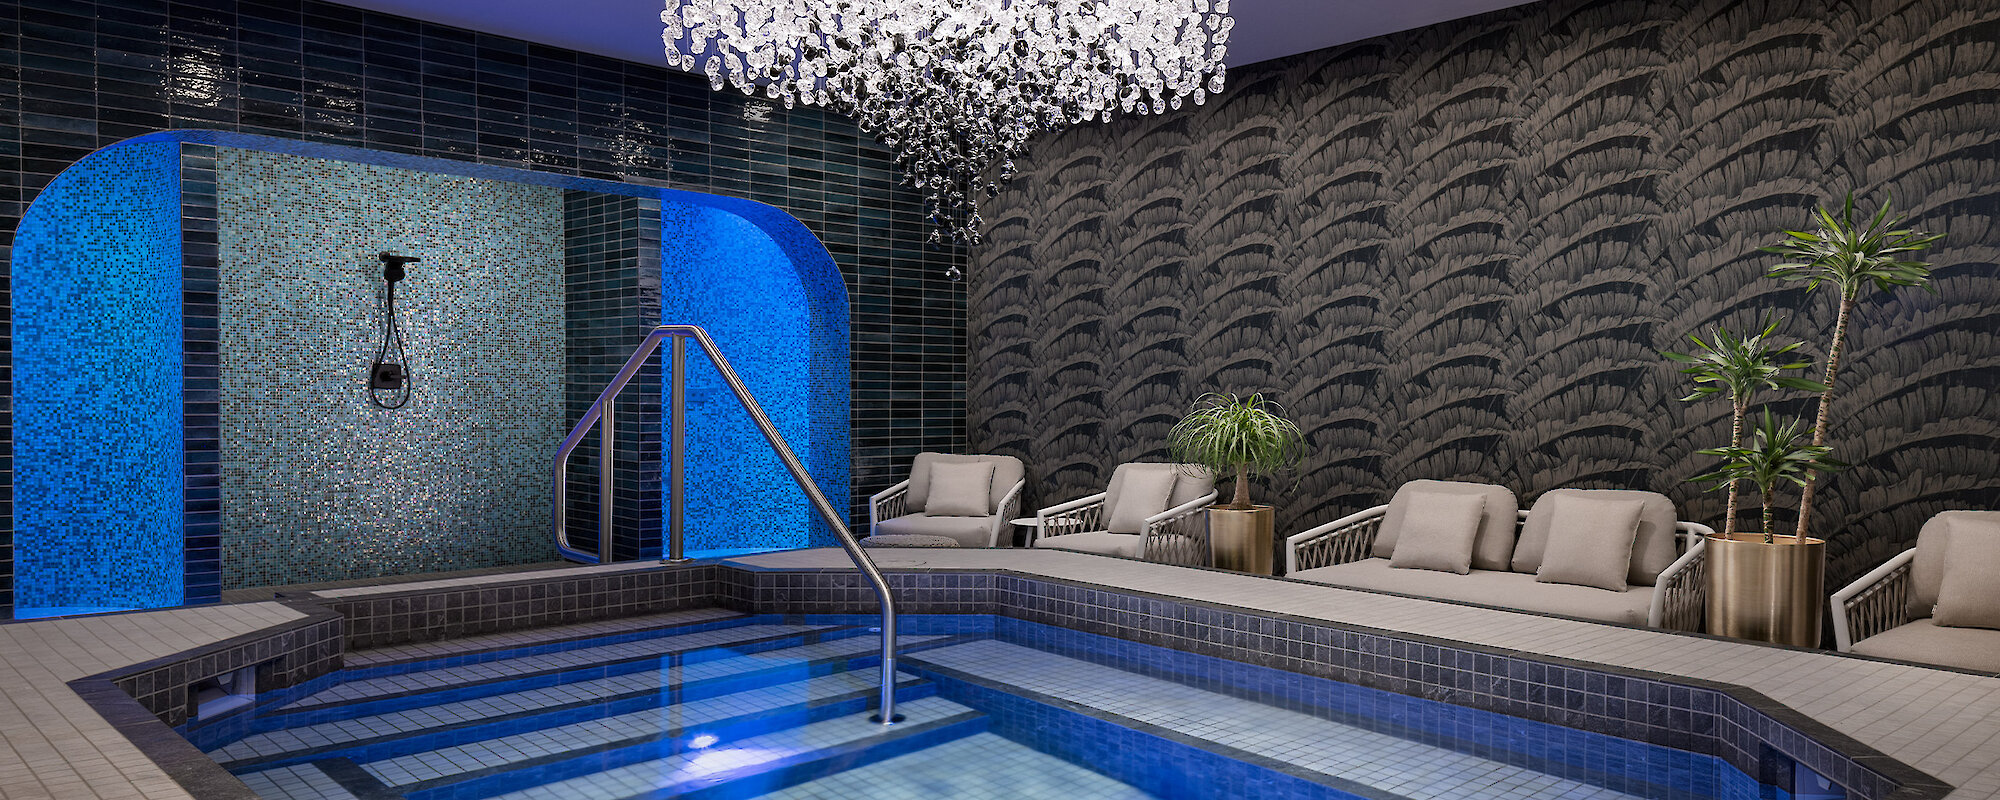 mineral pool and experience showers with a beautiful chandelier over the pool and loungers to the side